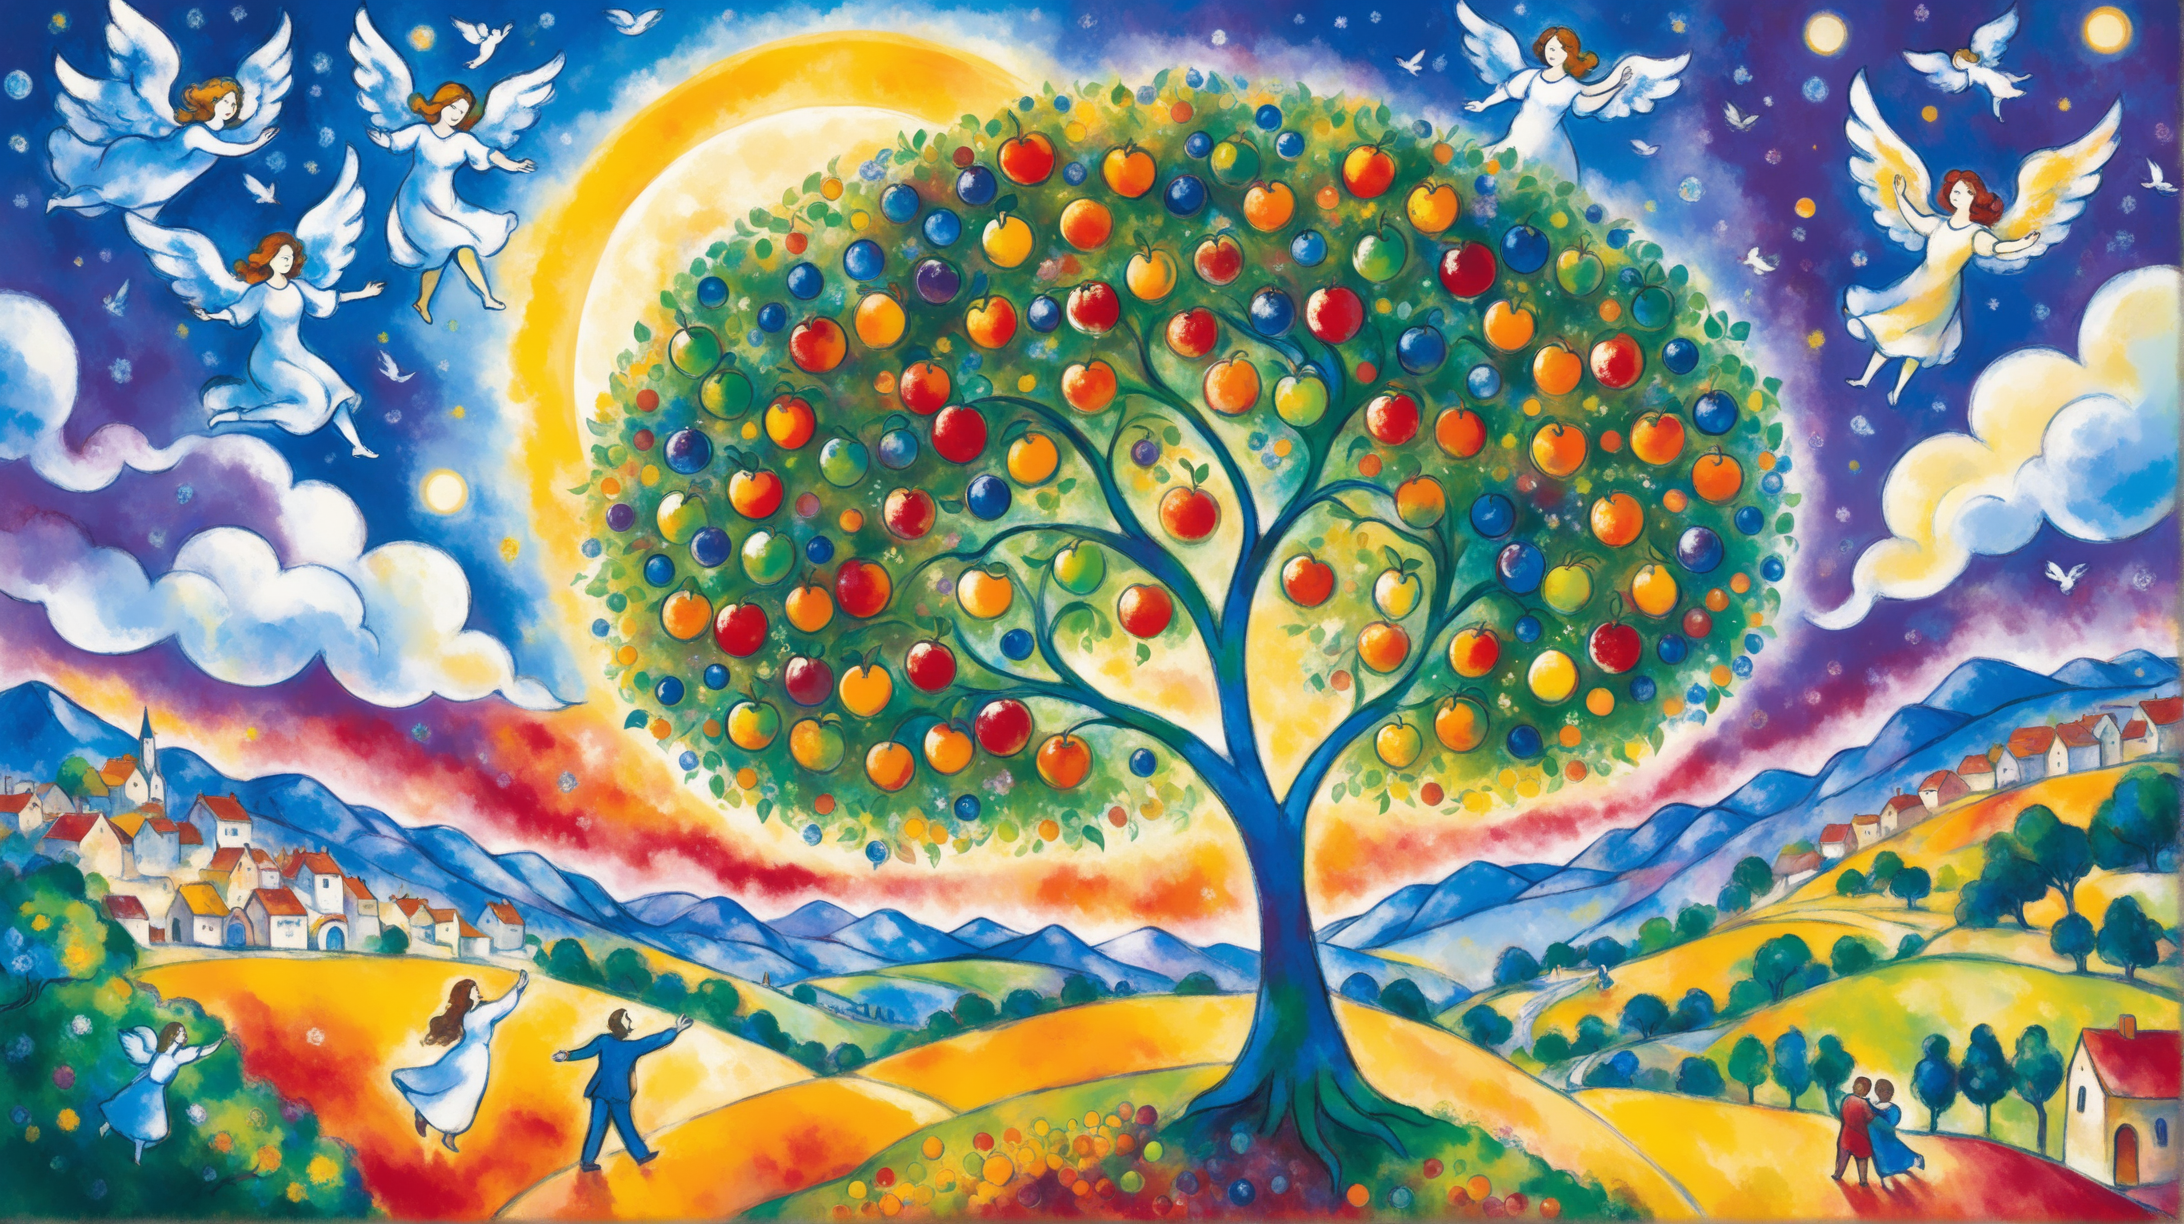 Generate a picture in the style of the artist 
Marc Chagall ,  a cornucopia feast using bright red, green, blue, yellow white and orange colors, give it more sky than land and add atree of life with angels floating randomly above and a  "Male God" larger in center of sky hand  reaching out  tp woman AND MAN  add fruit 